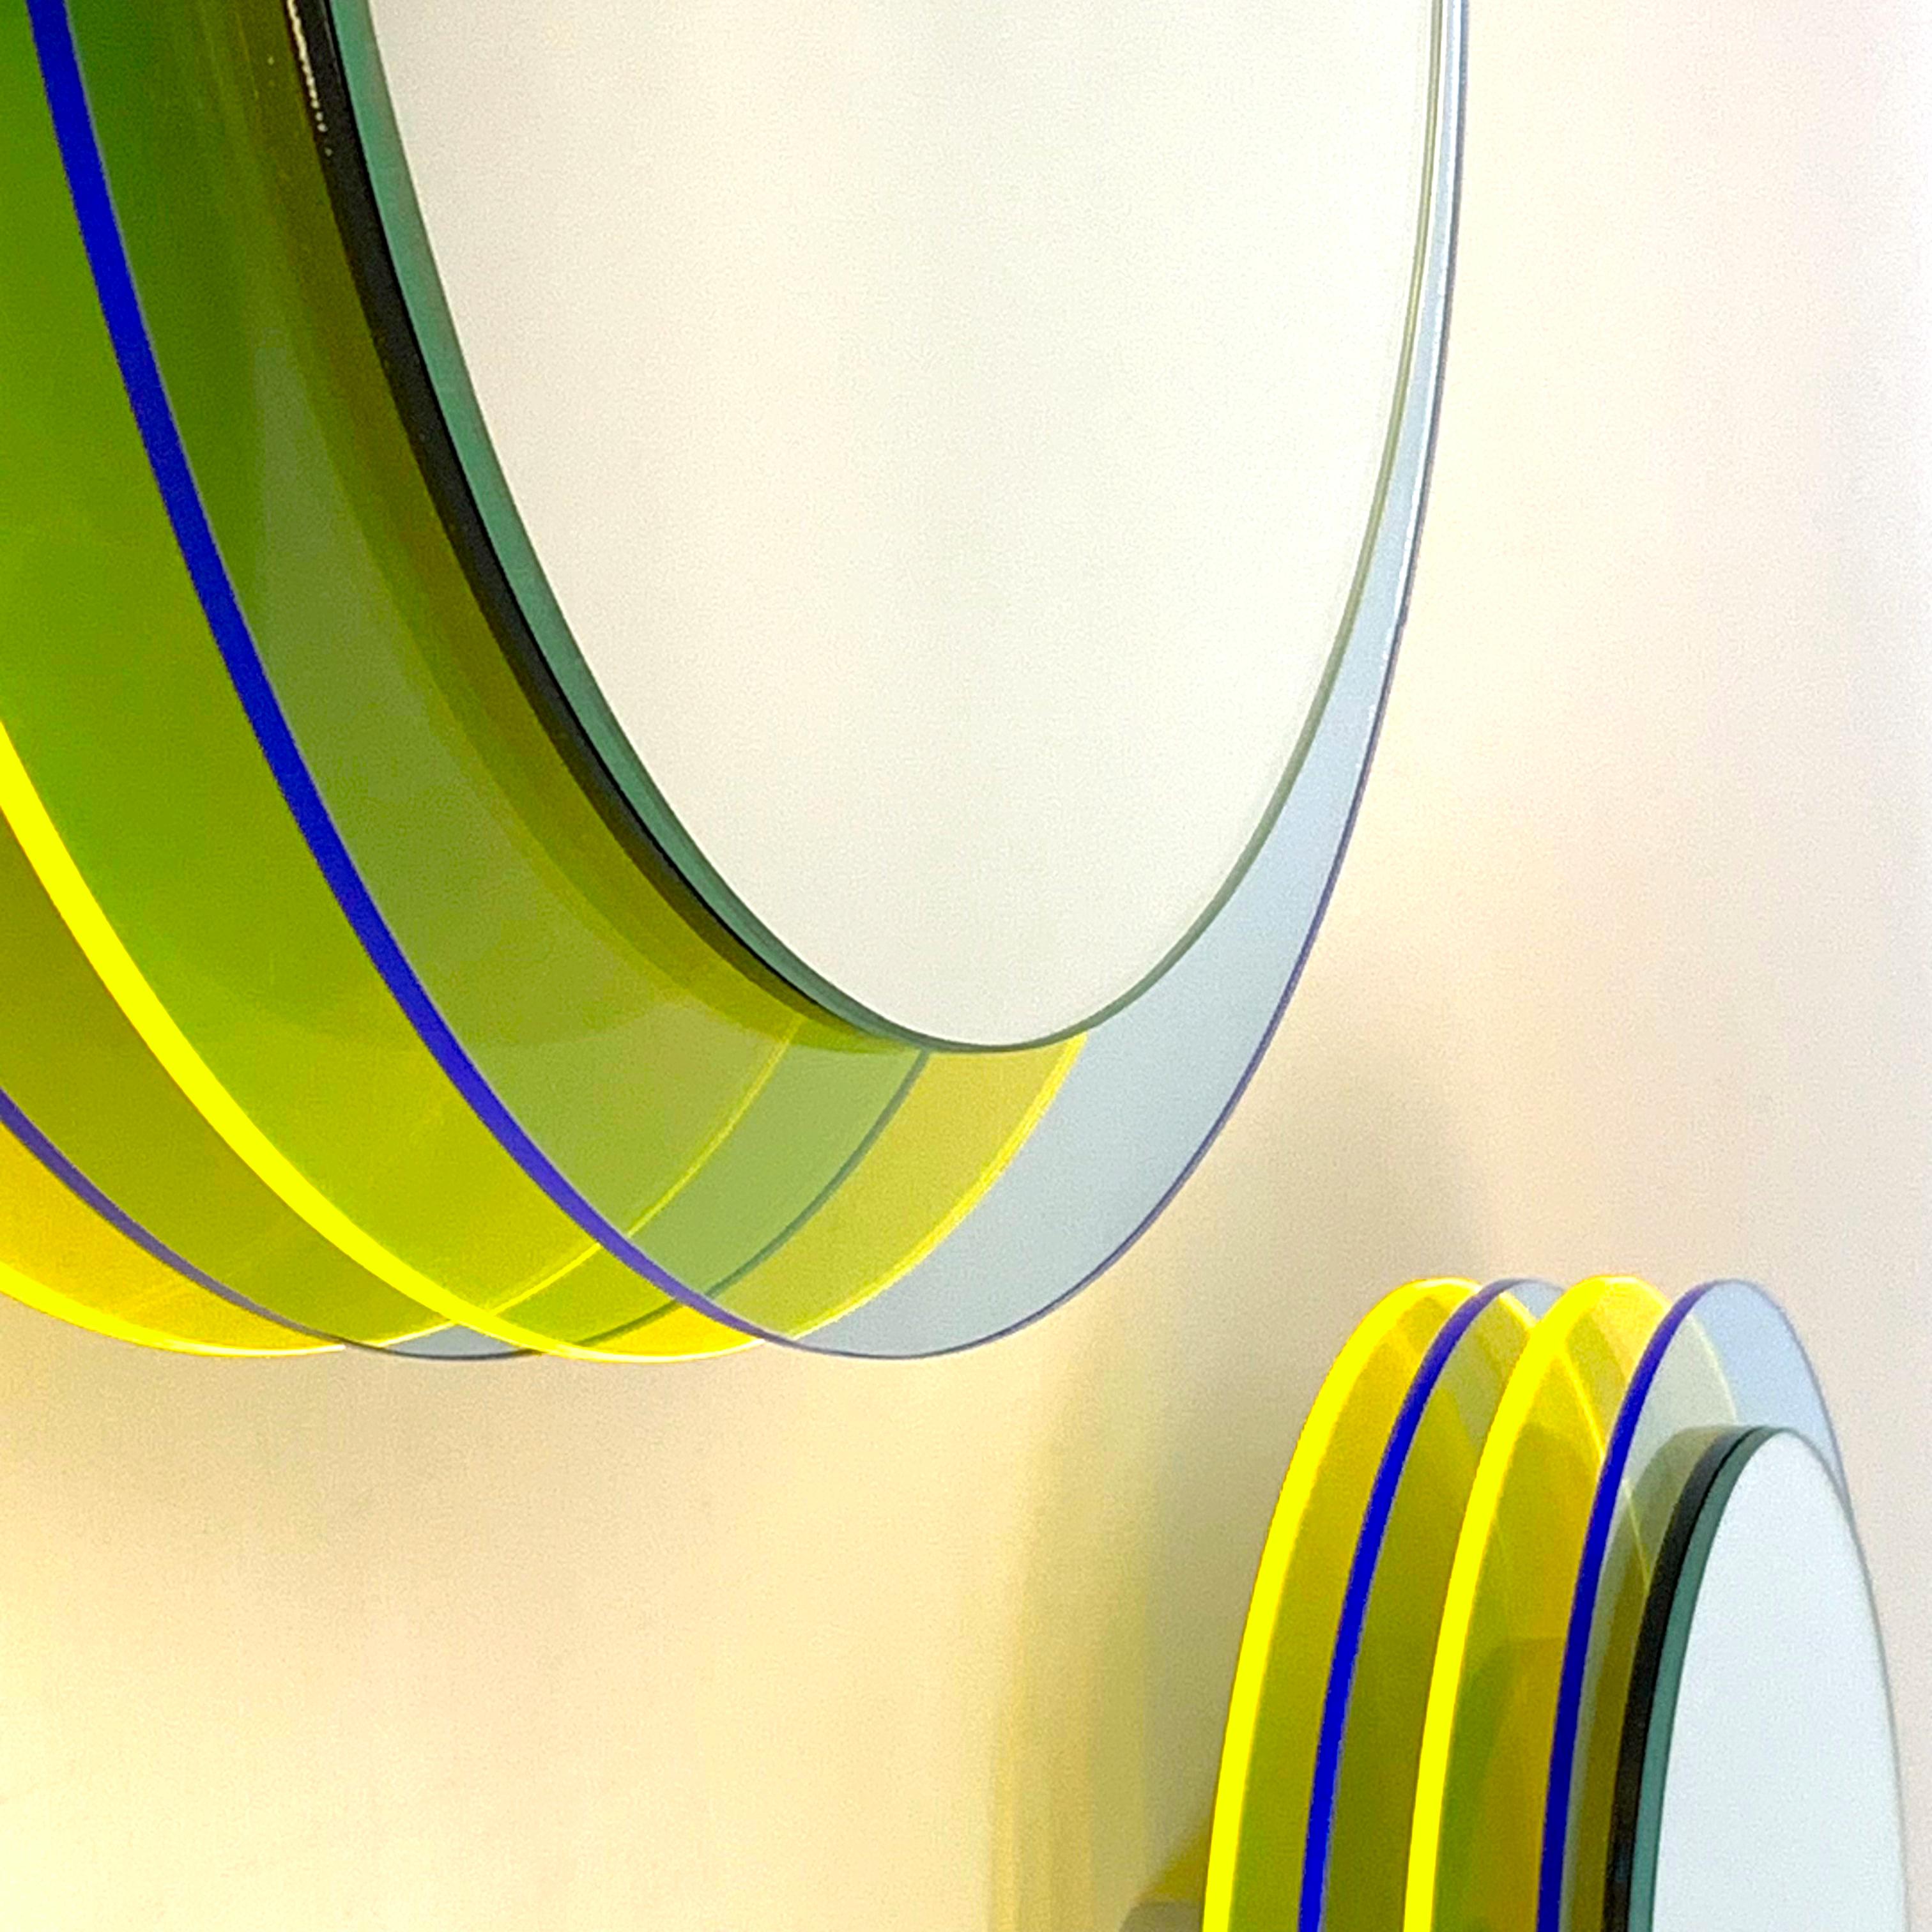 Aluminum Set Hebi - Wall Mirrors with Plexiglass, Design Sculpture by Andreas Berlin For Sale